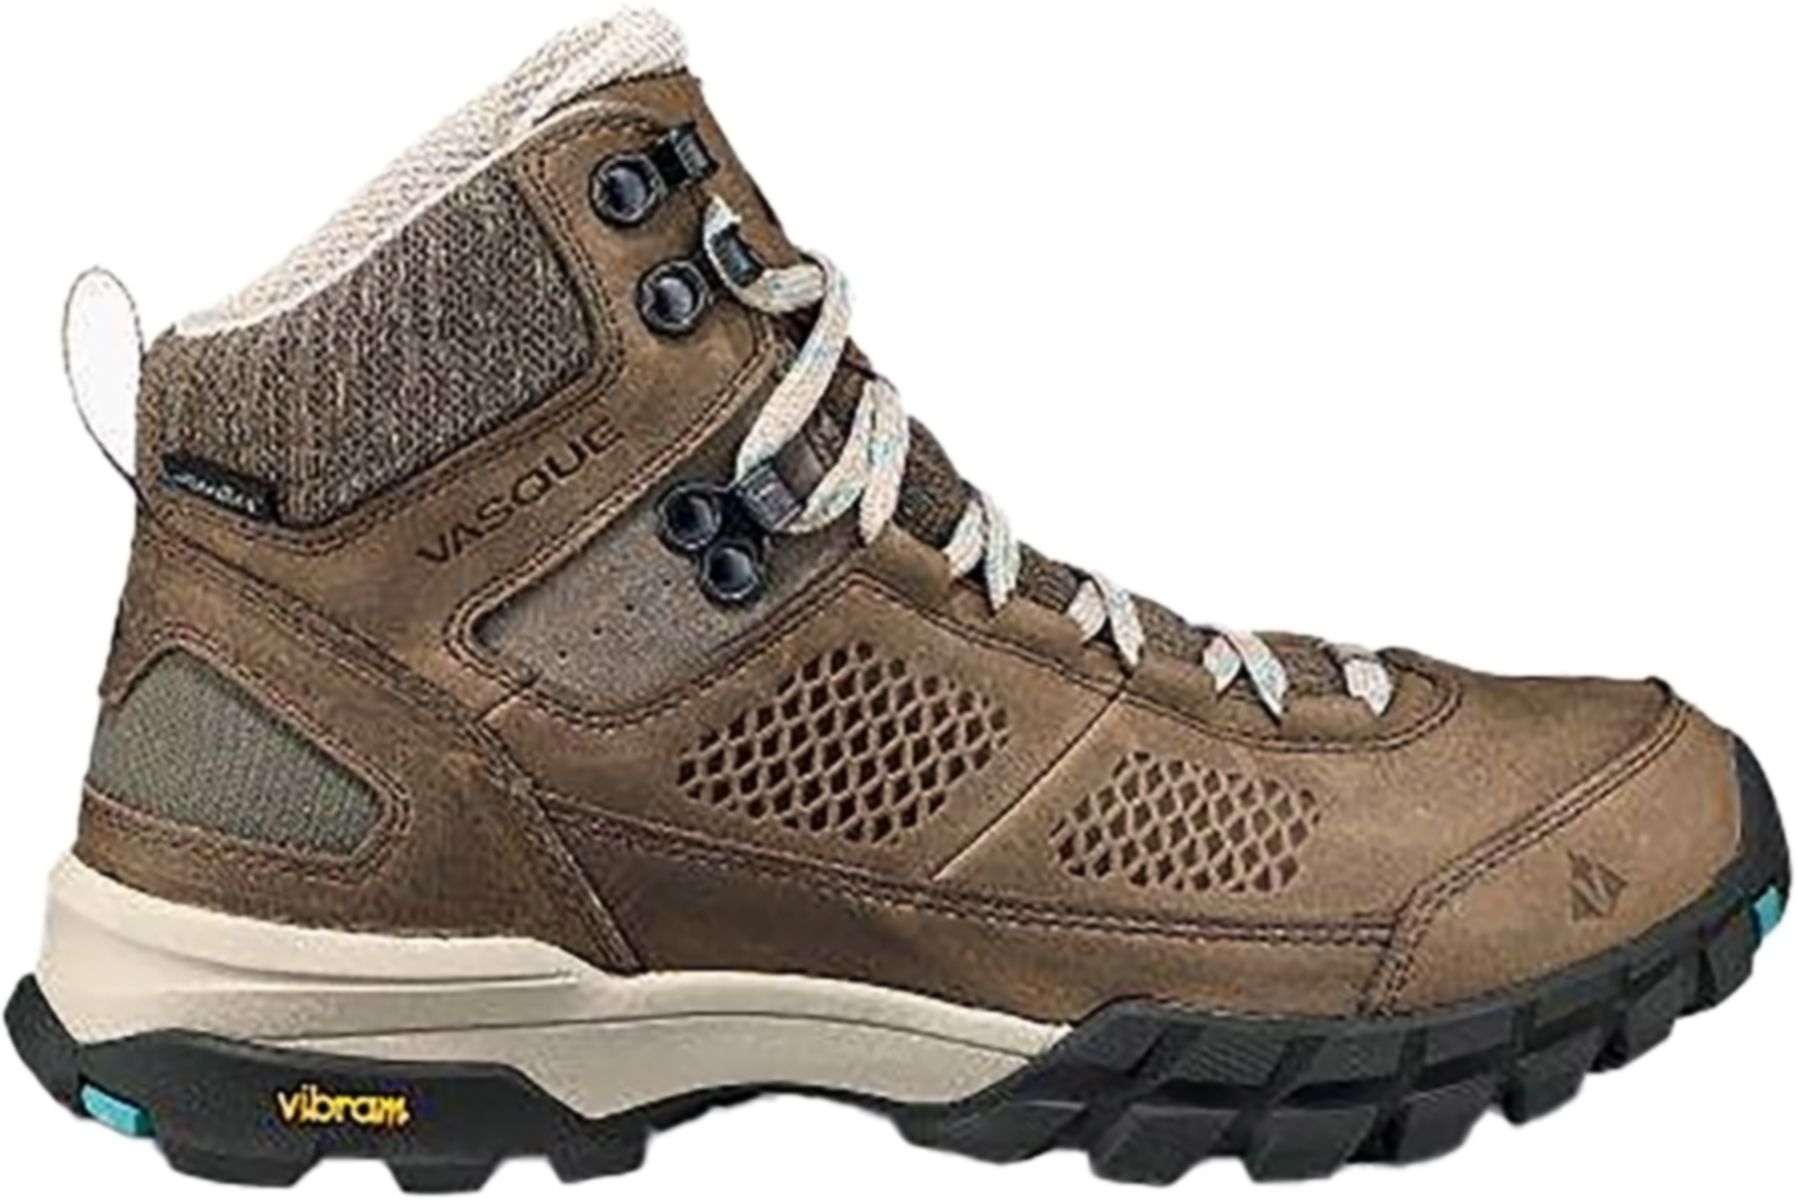 Photos - Trekking Shoes Vasque Women's Talus All-Terrain UltraDry Hiking Boots, Size 8, Brindle 20 